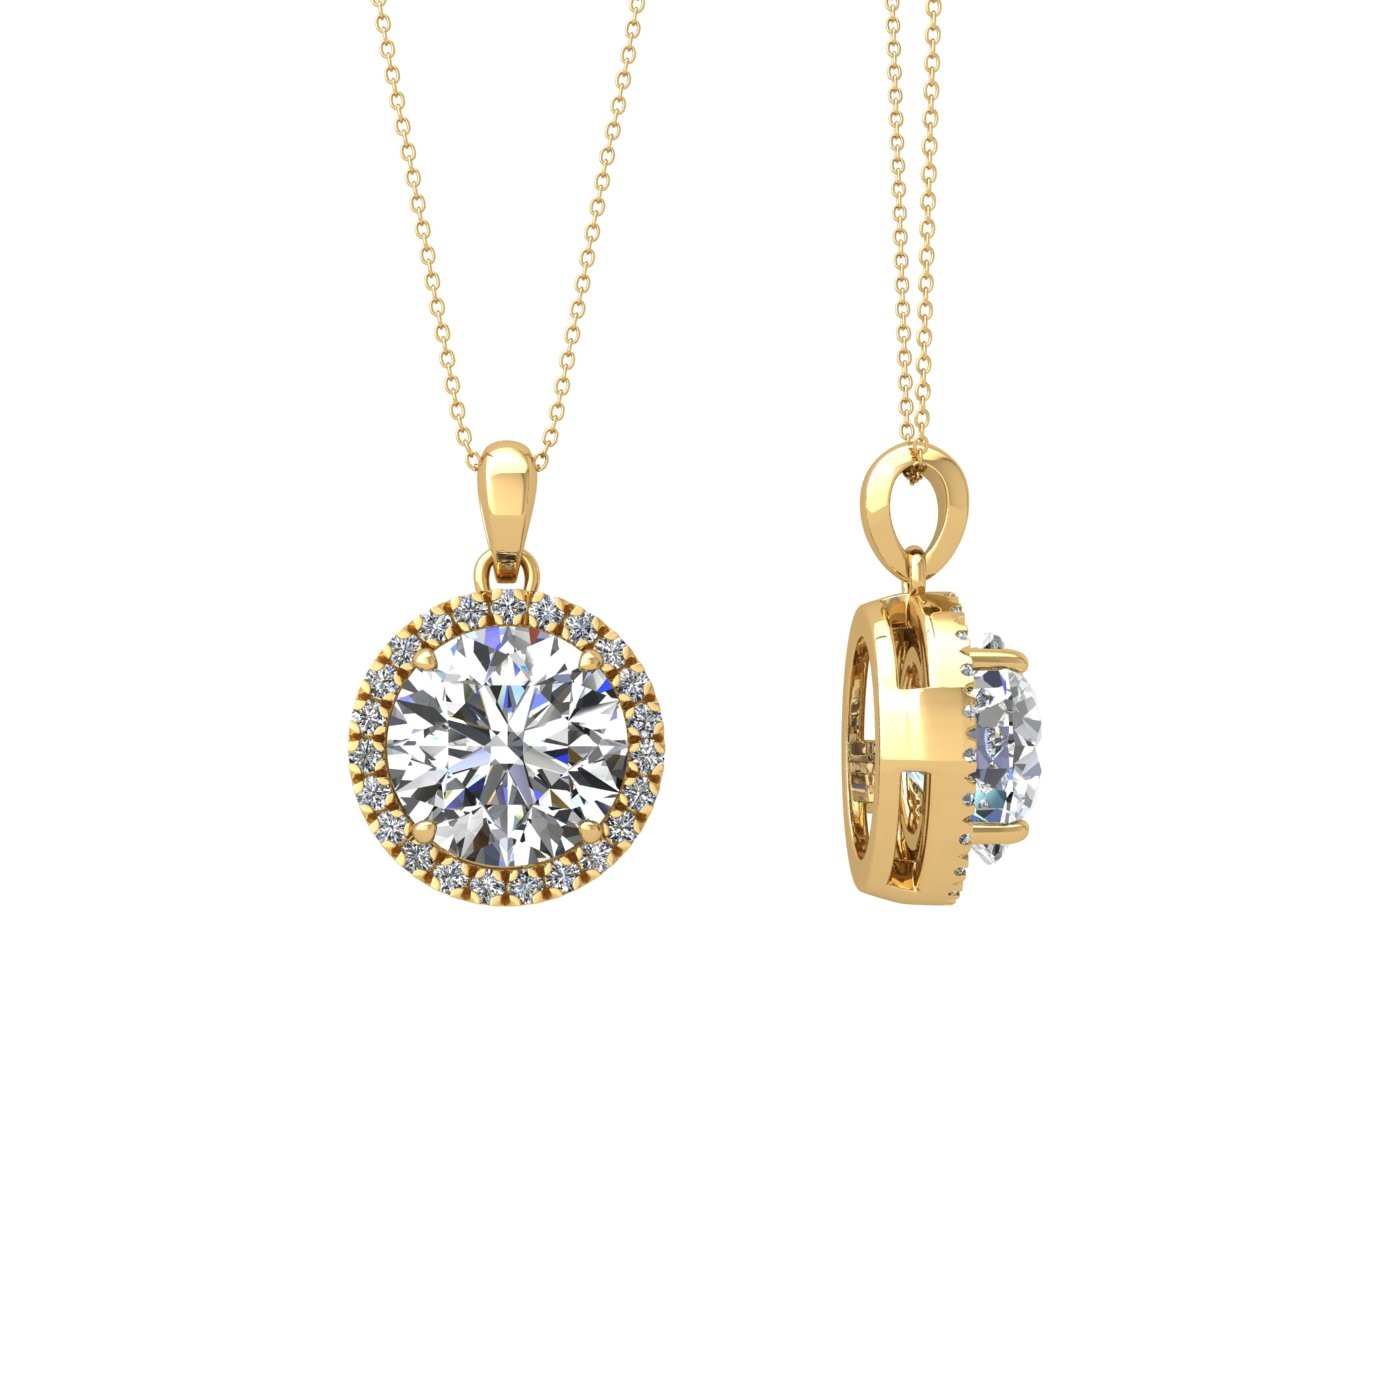 18k yellow gold  1,2 ct 4 prong round shape diamond pendant with diamond pavÉ set halo including chain seperate from the pendant Photos & images